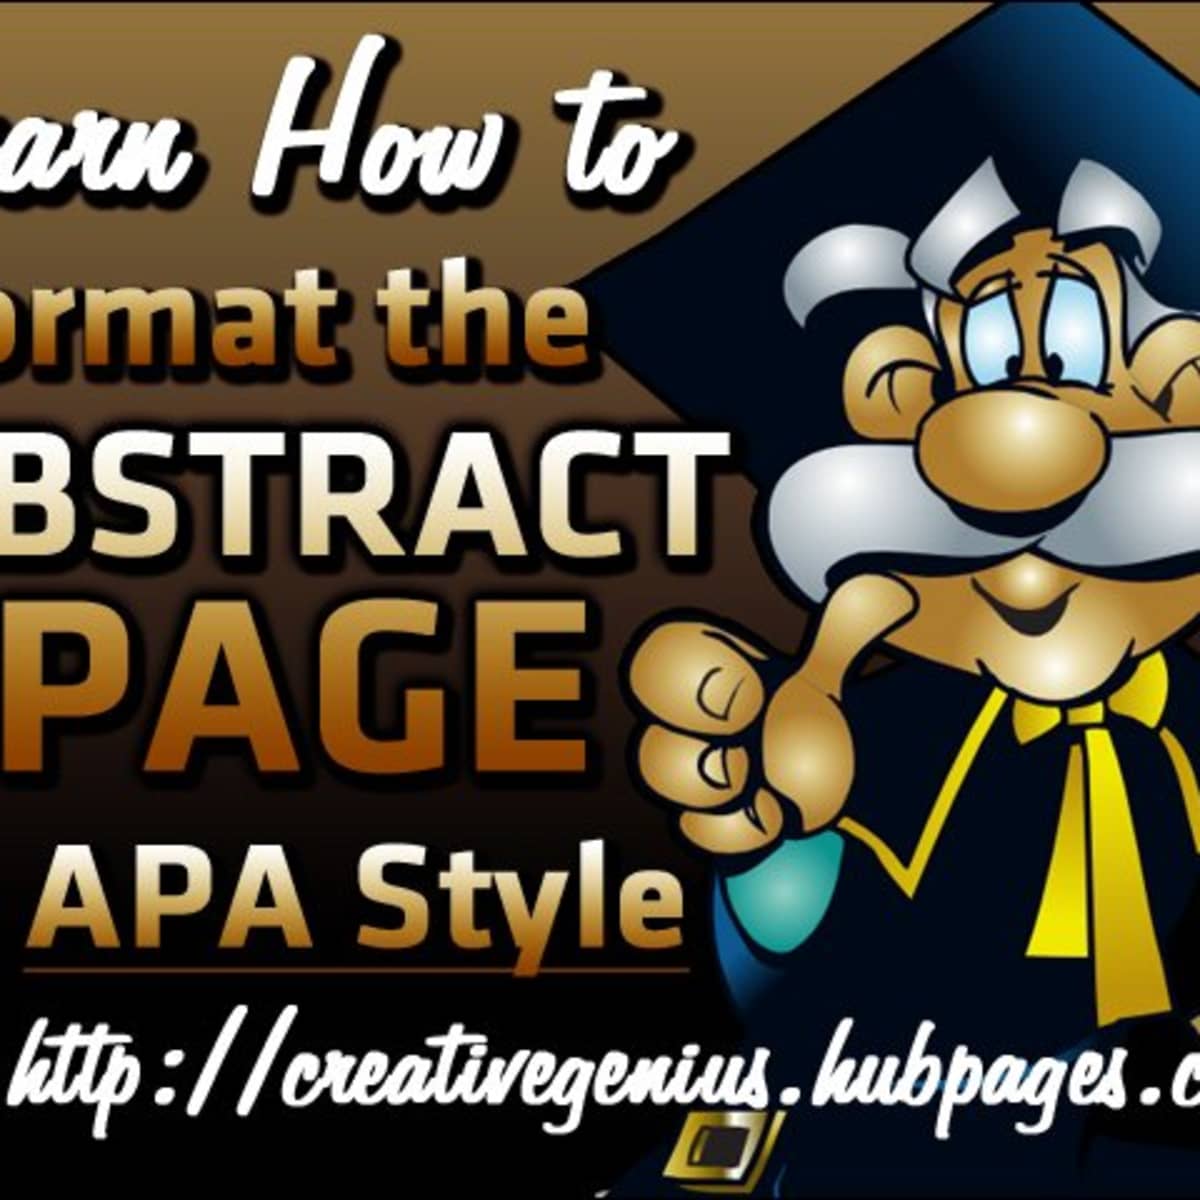 Format The Abstract Page In Apa Style 6th Edition Owlcation